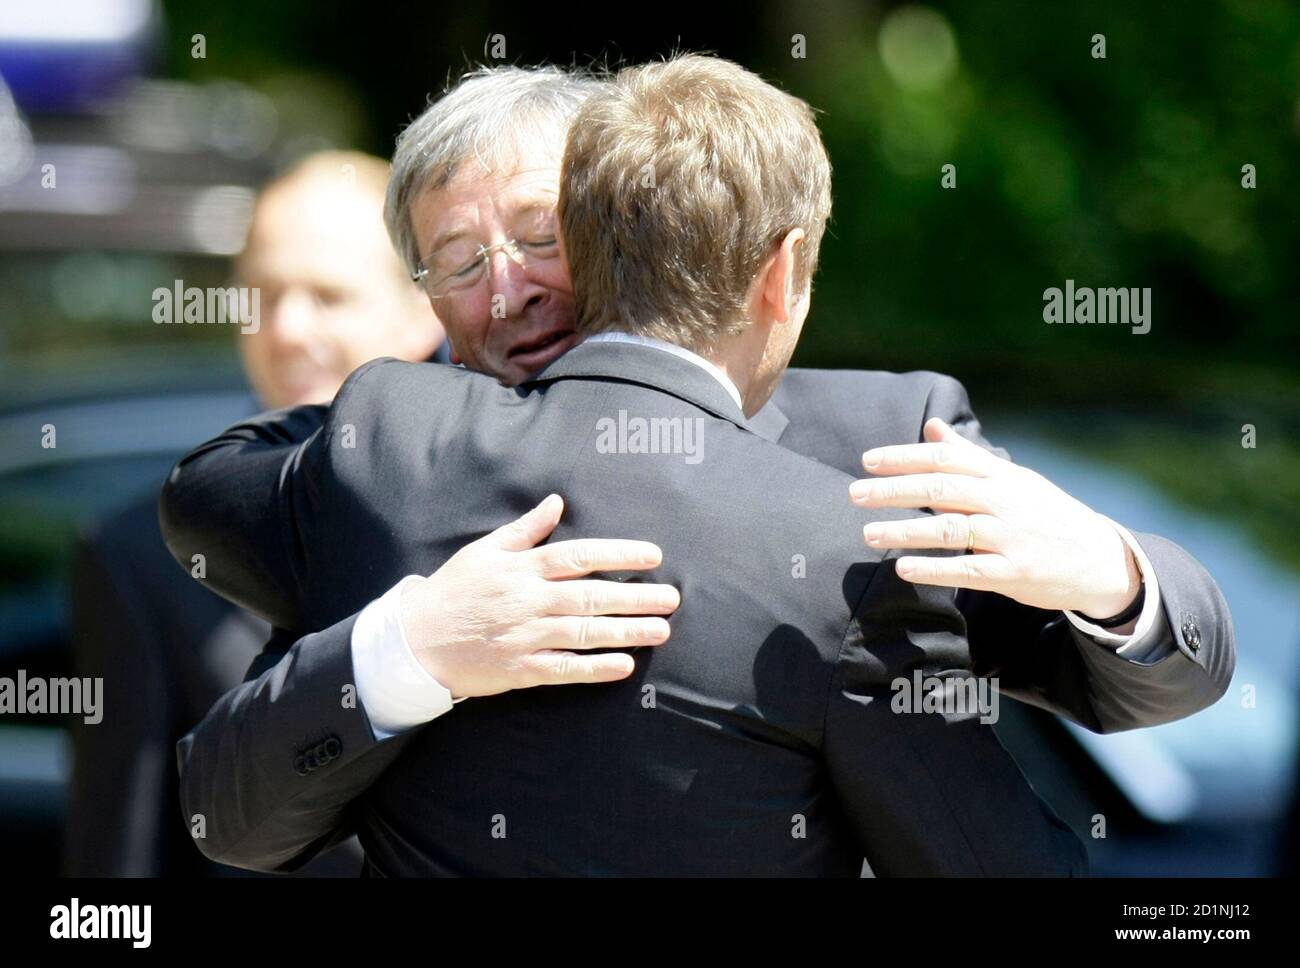 Polish Prime Minister Donald Tusk (R) embraces Luxembourg's Prime Minister Jean-Claude Juncker as they meet at the Palac na Wodzie in Lazienki Park in Warsaw June 10, 2008. REUTERS/Peter Andrews (POLAND) Stock Photo